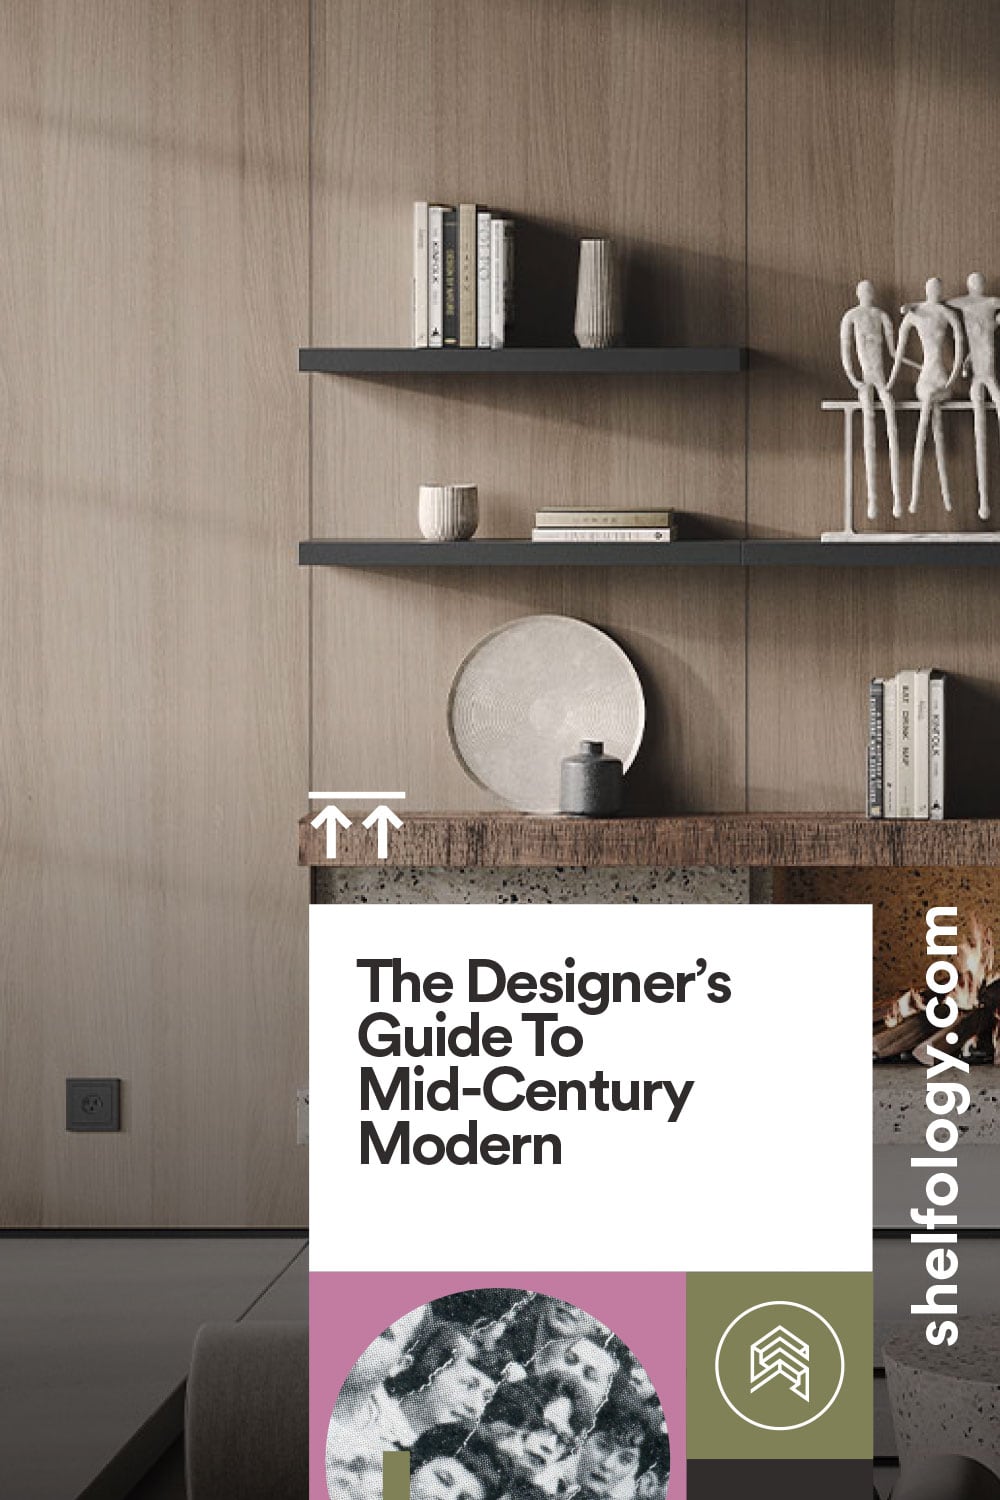 The Designer’s Guide To Mid-Century Modern